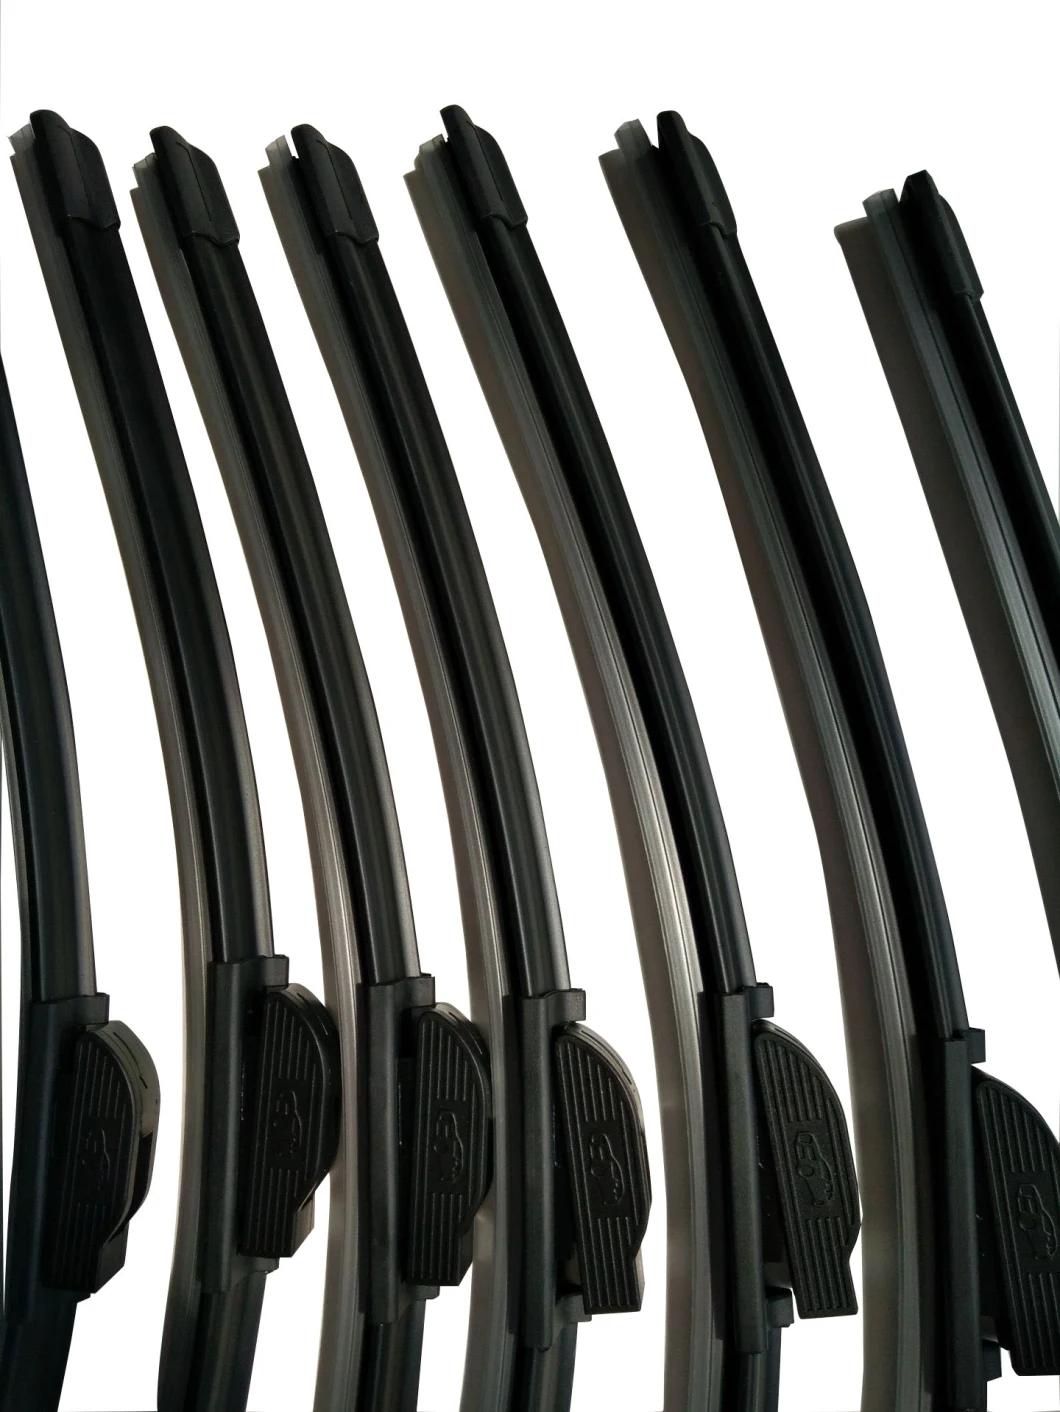 Suit 95% Arms with 2 Adapters-Wiper Blade Meto